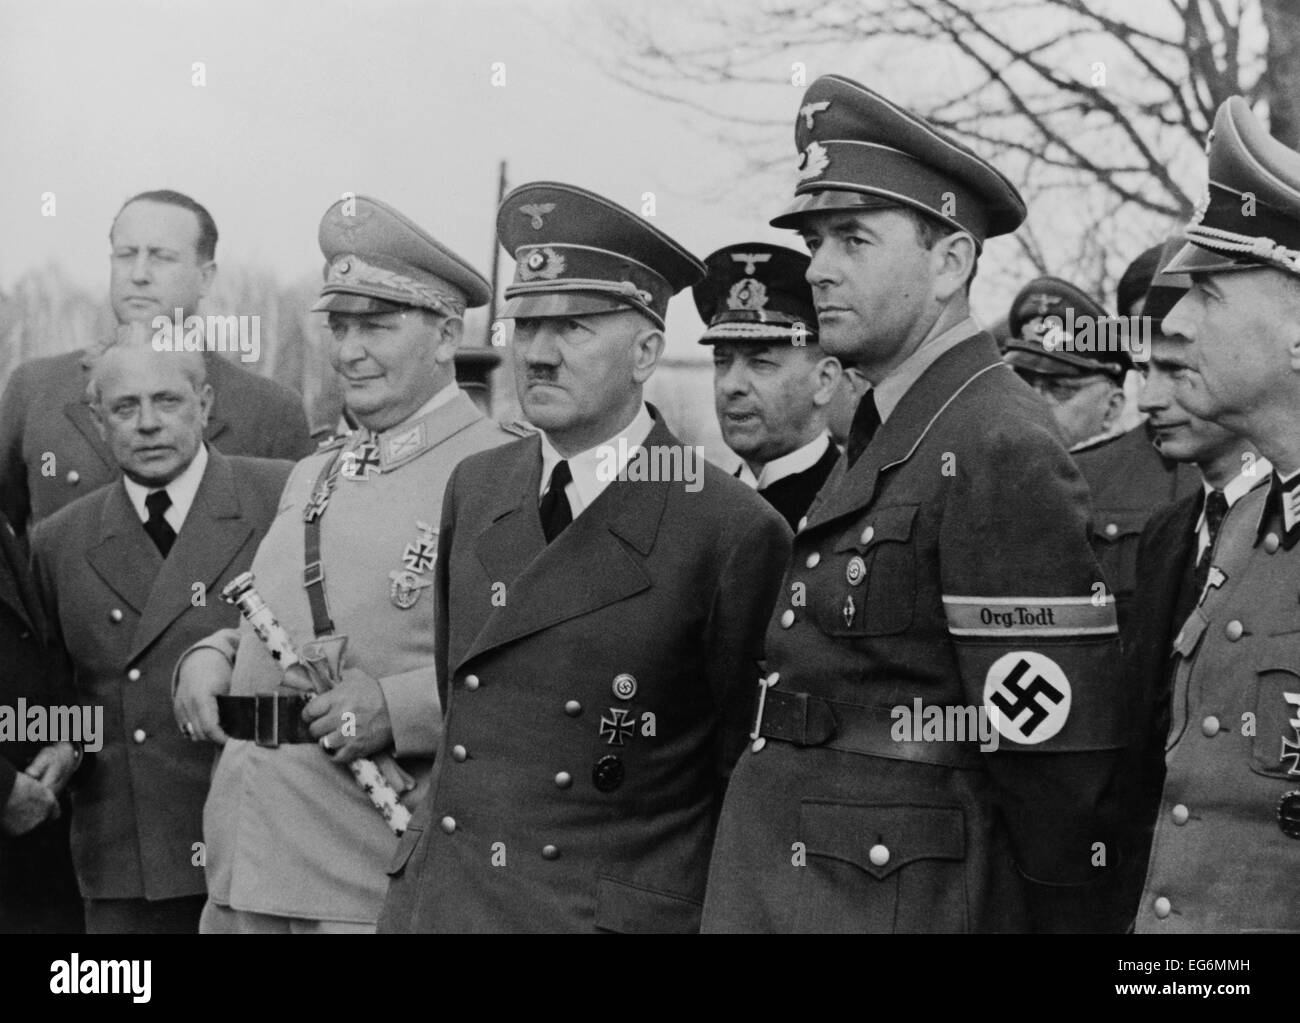 Adolf Hitler, flanked by Hermann Goering, and Albert Speer. Speer was Minister of Armaments and War Production. His 'Org. Tolt' Stock Photo